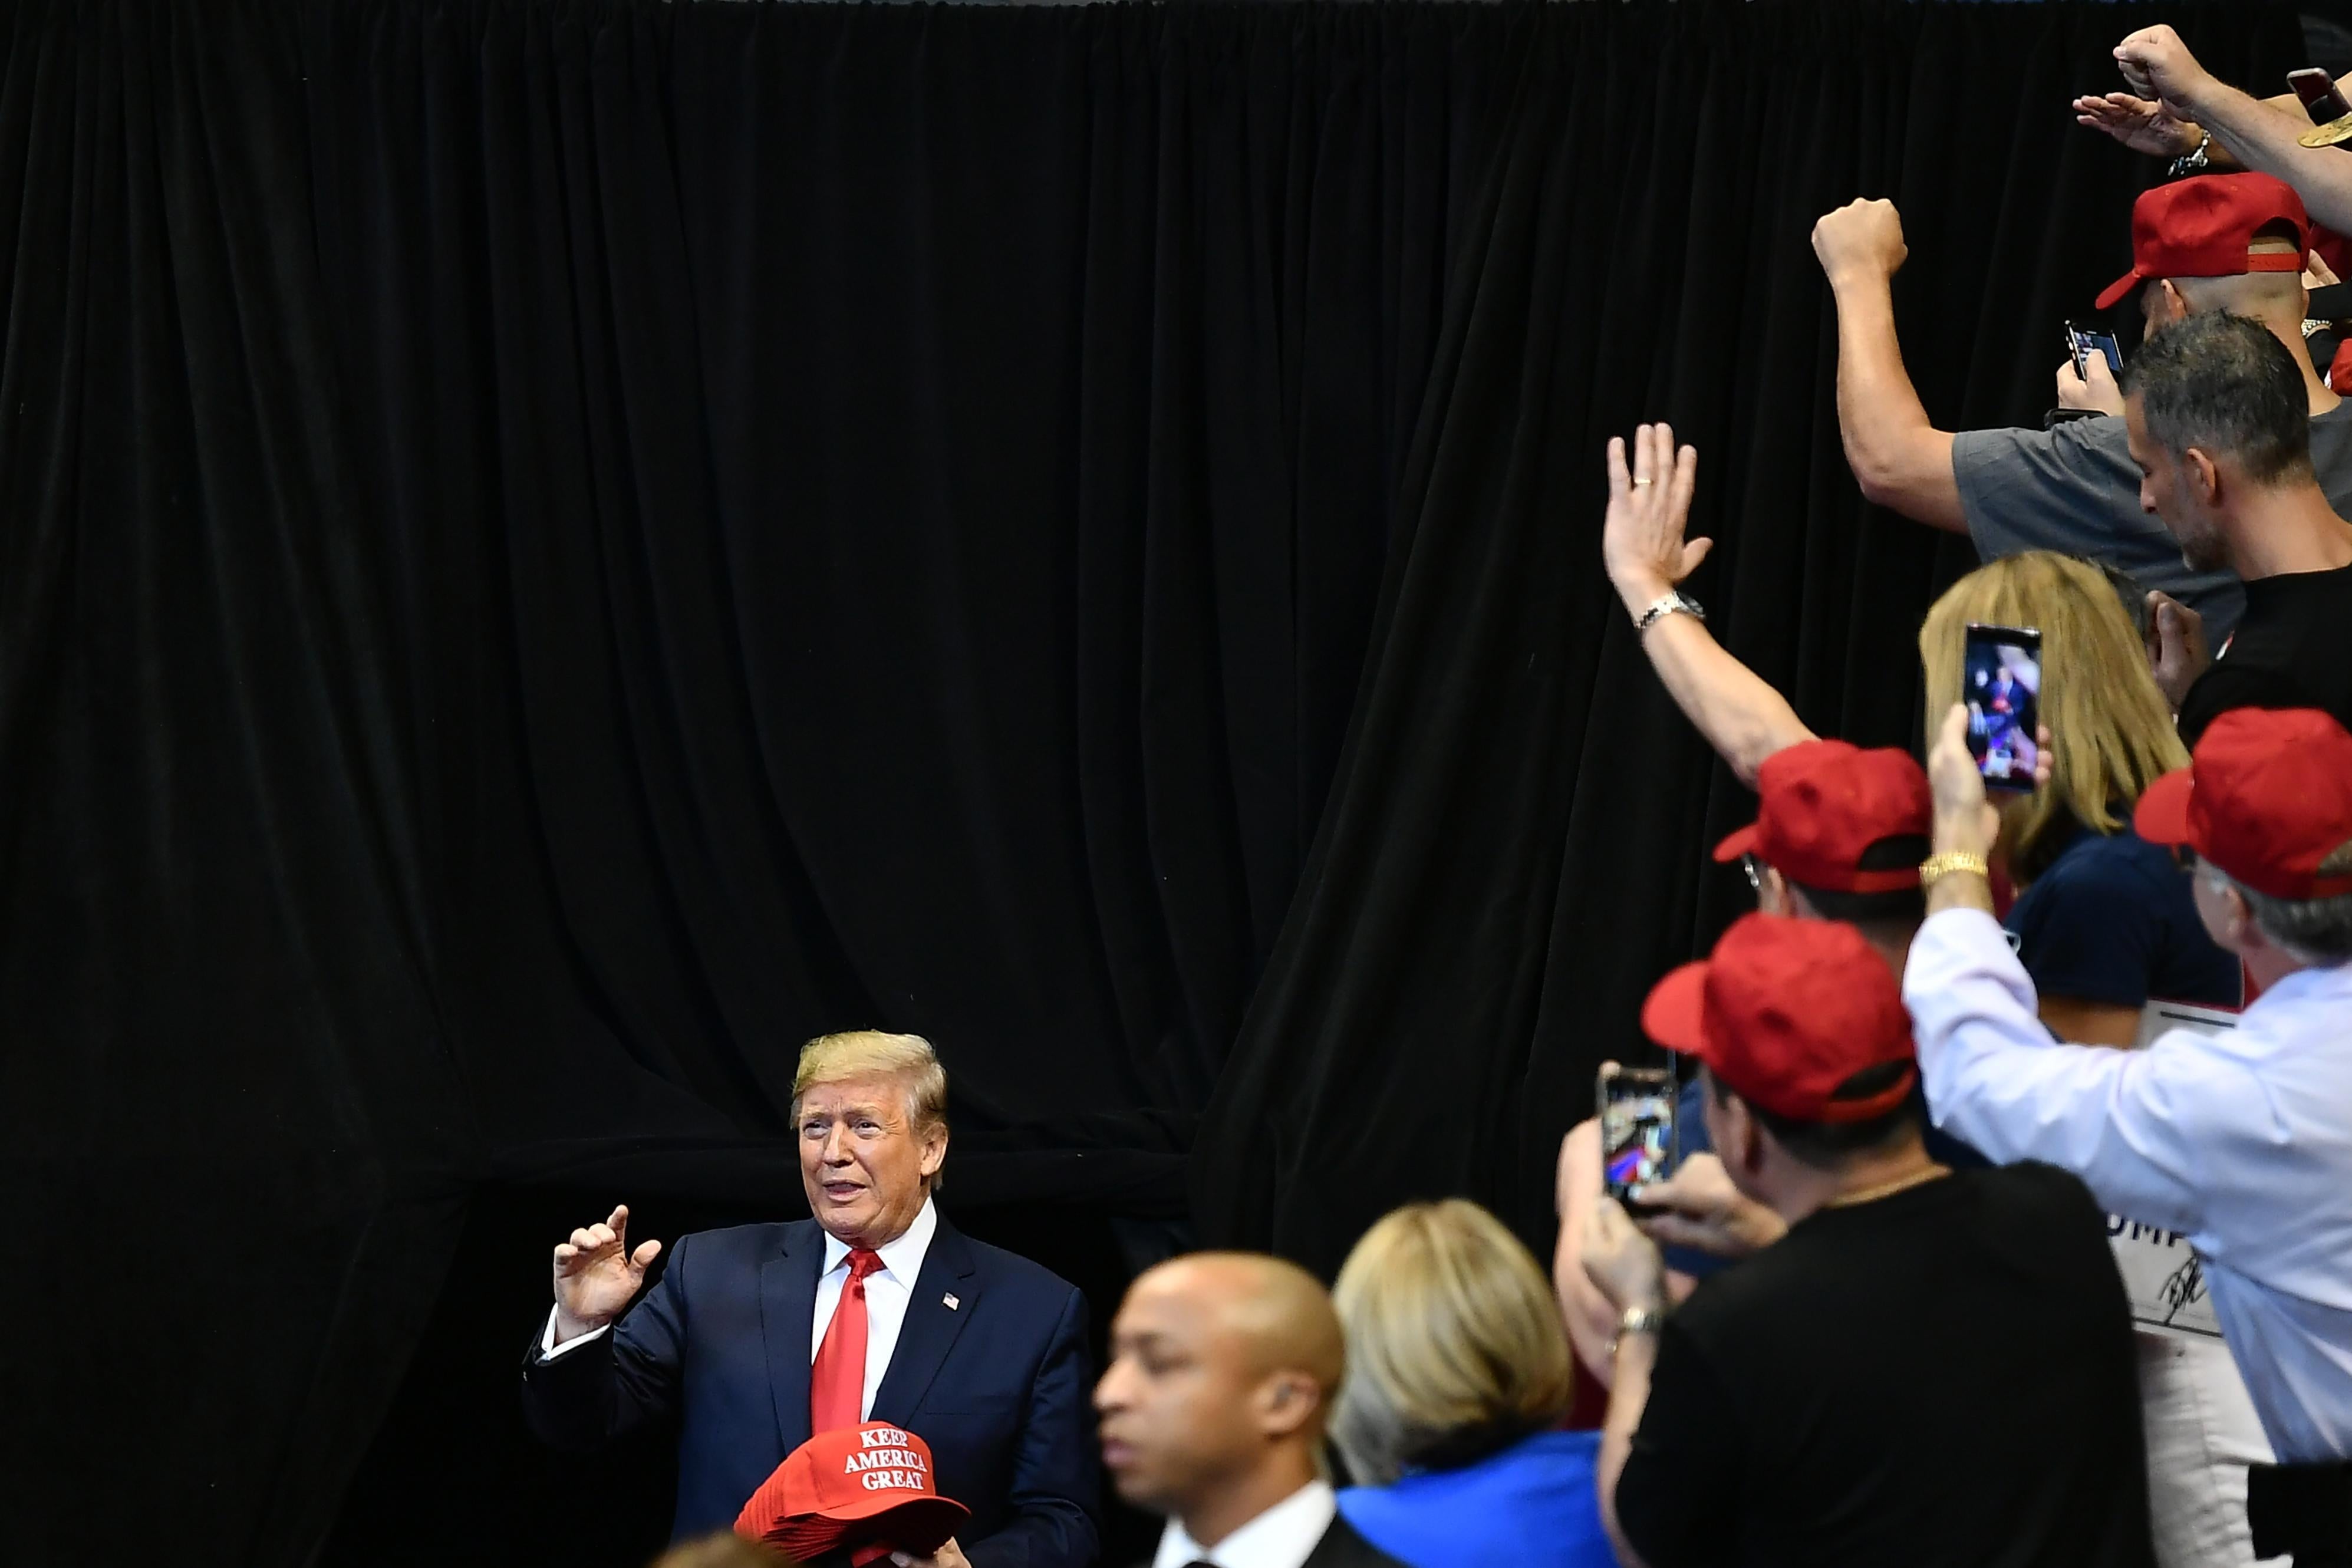 Donald Trump arrives at a rally as supporters in red hats take photos of him and cheer.